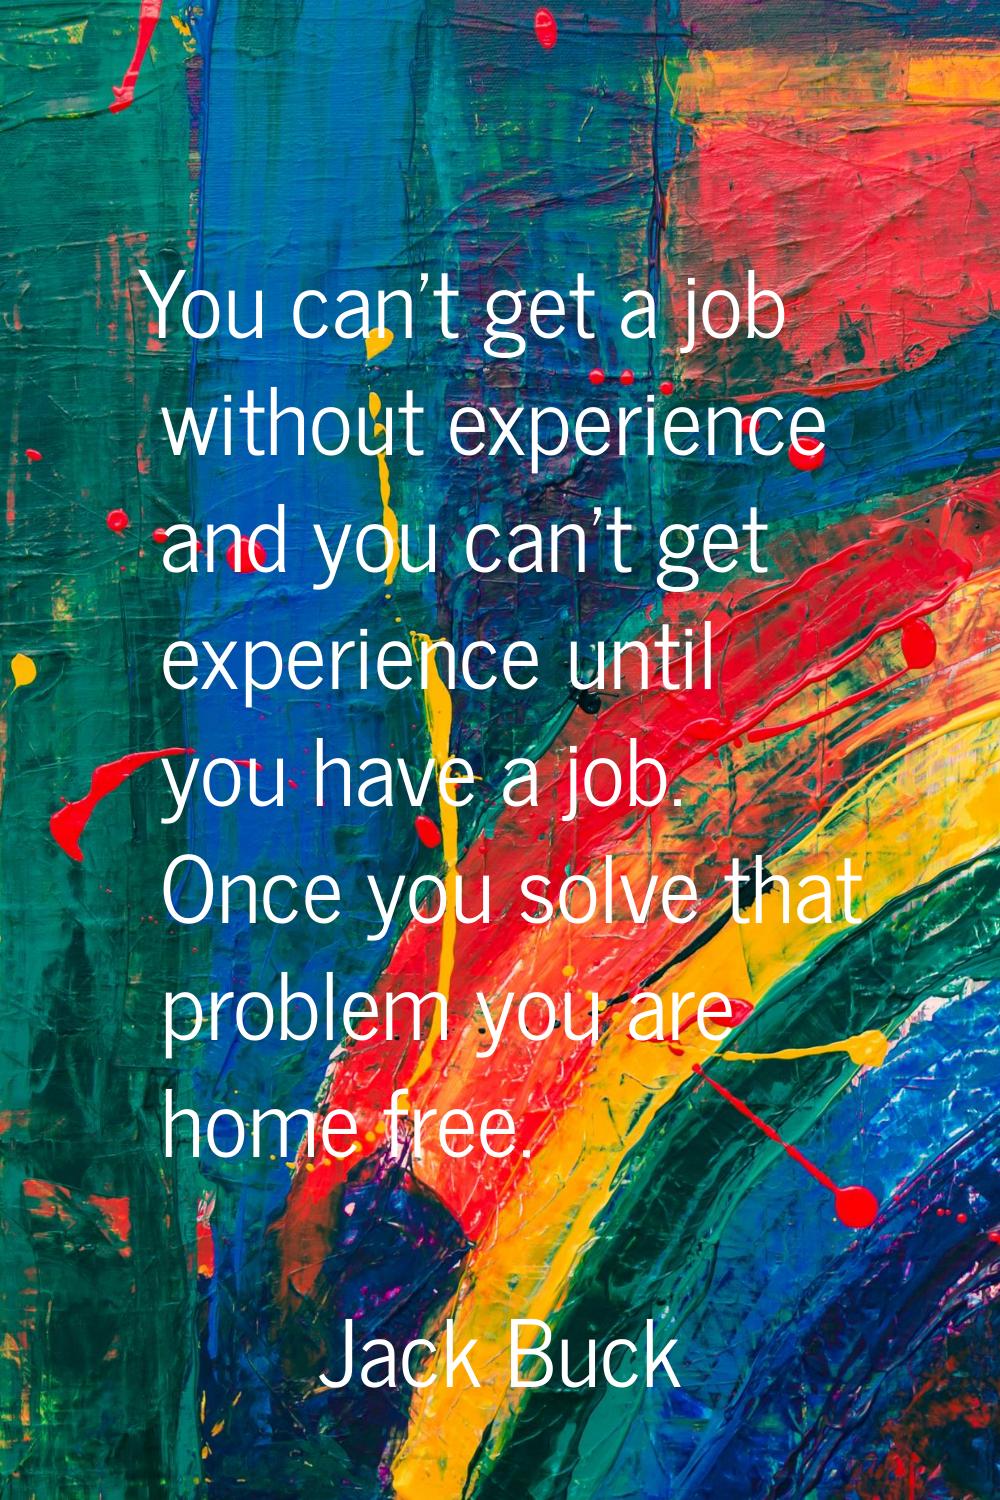 You can't get a job without experience and you can't get experience until you have a job. Once you 